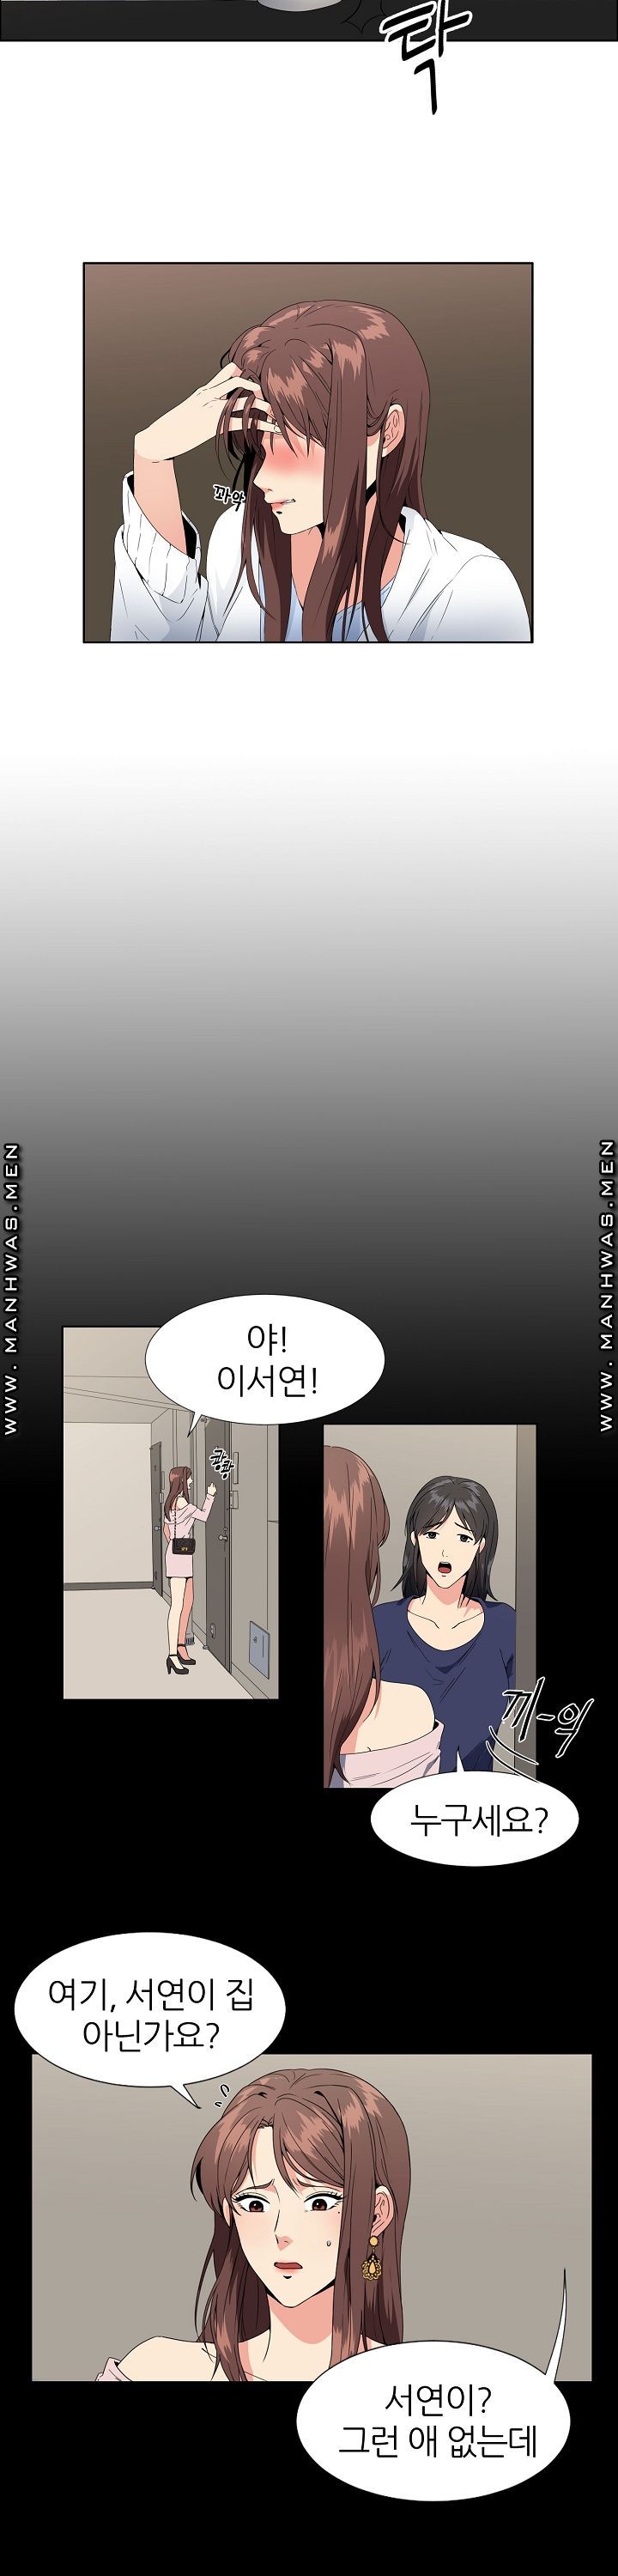 Memory of July Raw - Chapter 1 Page 8